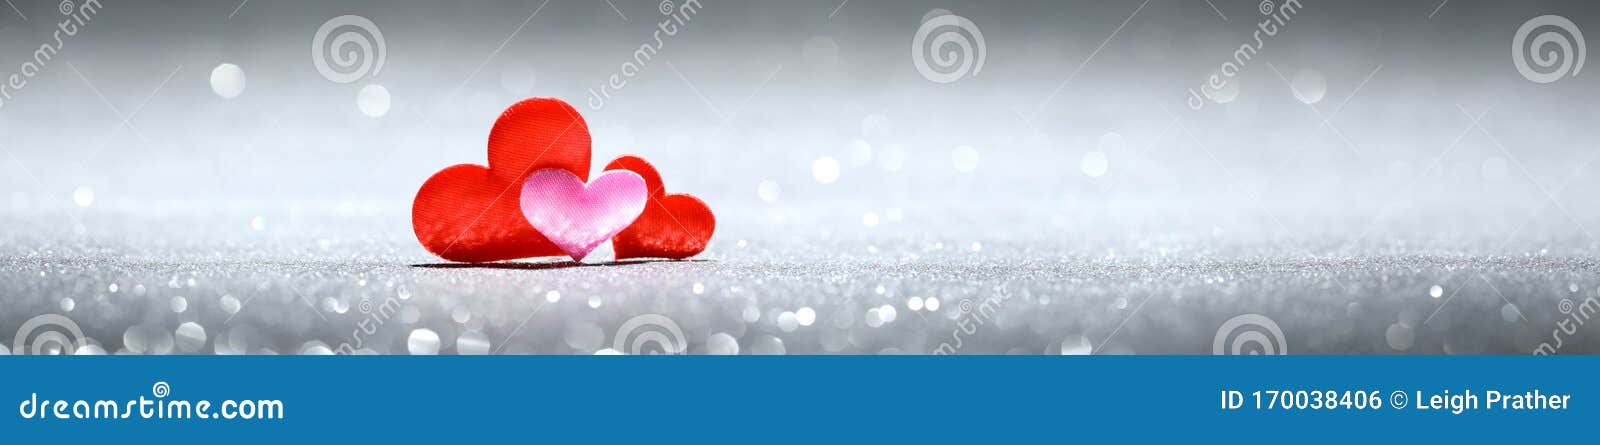 three little red and pink hearts on sparkling silver background. for love, romance, or valentine`s day